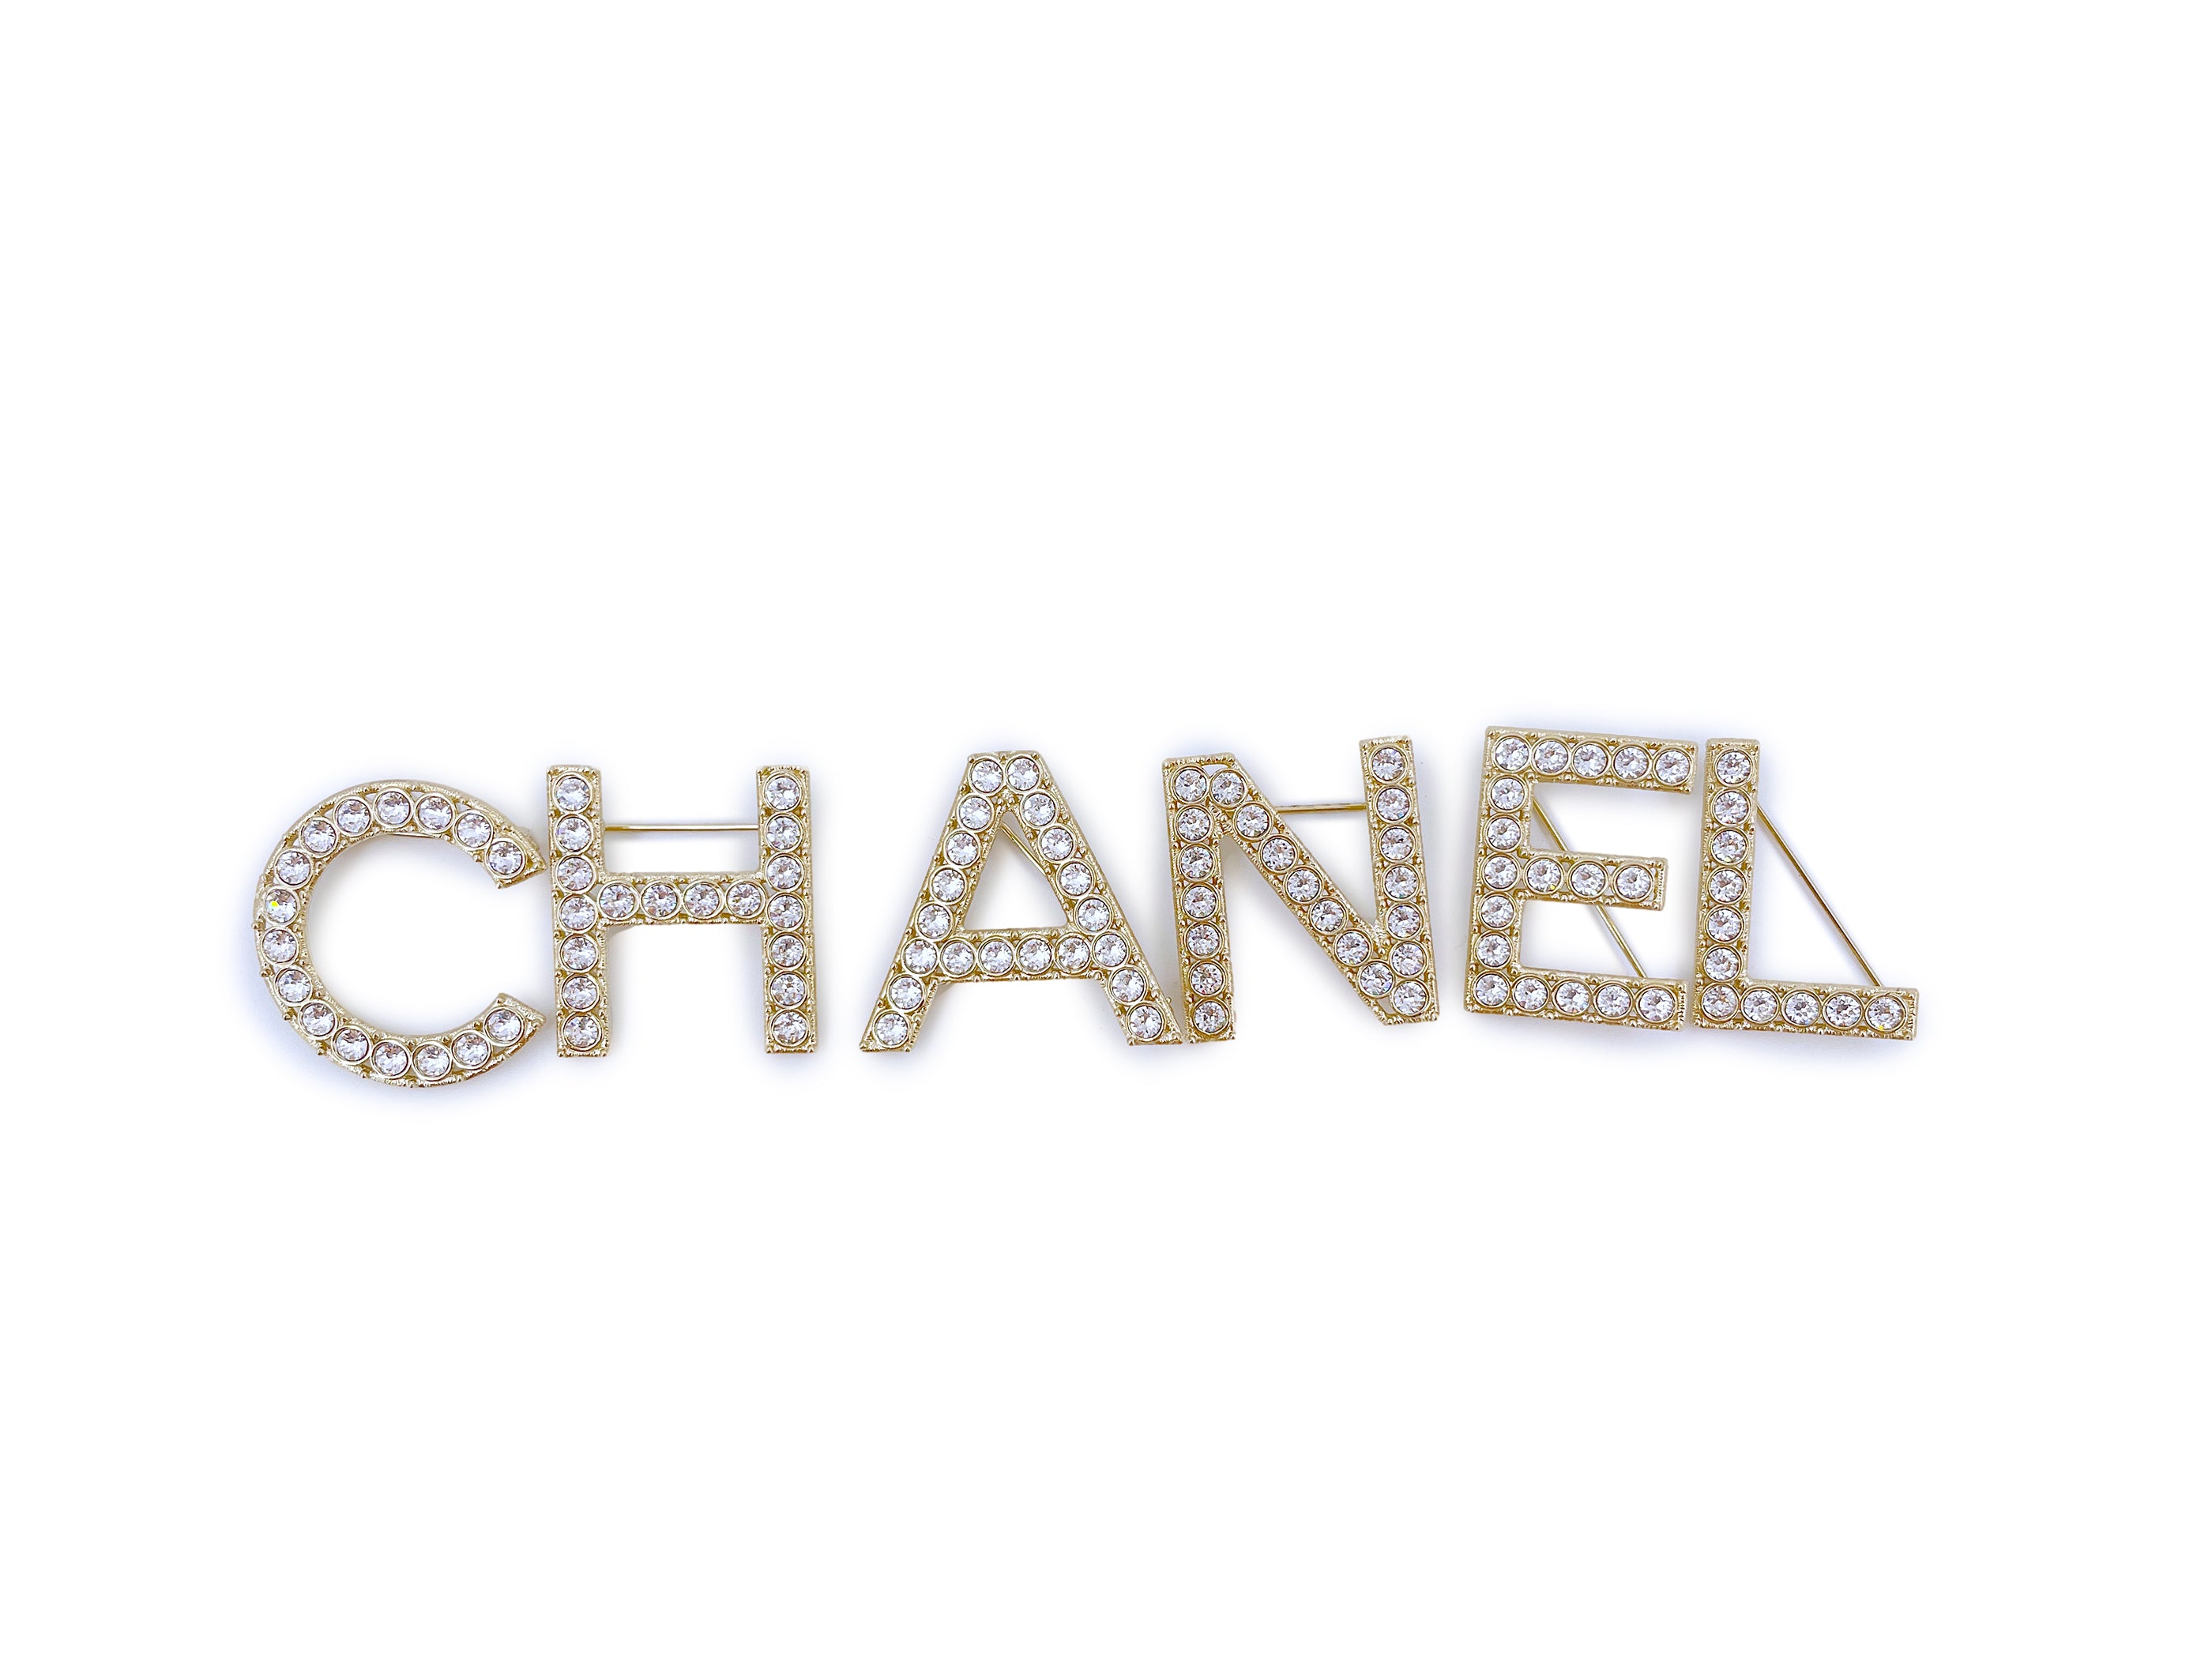 CHANEL Glass Fashion Brooches & Pins for sale